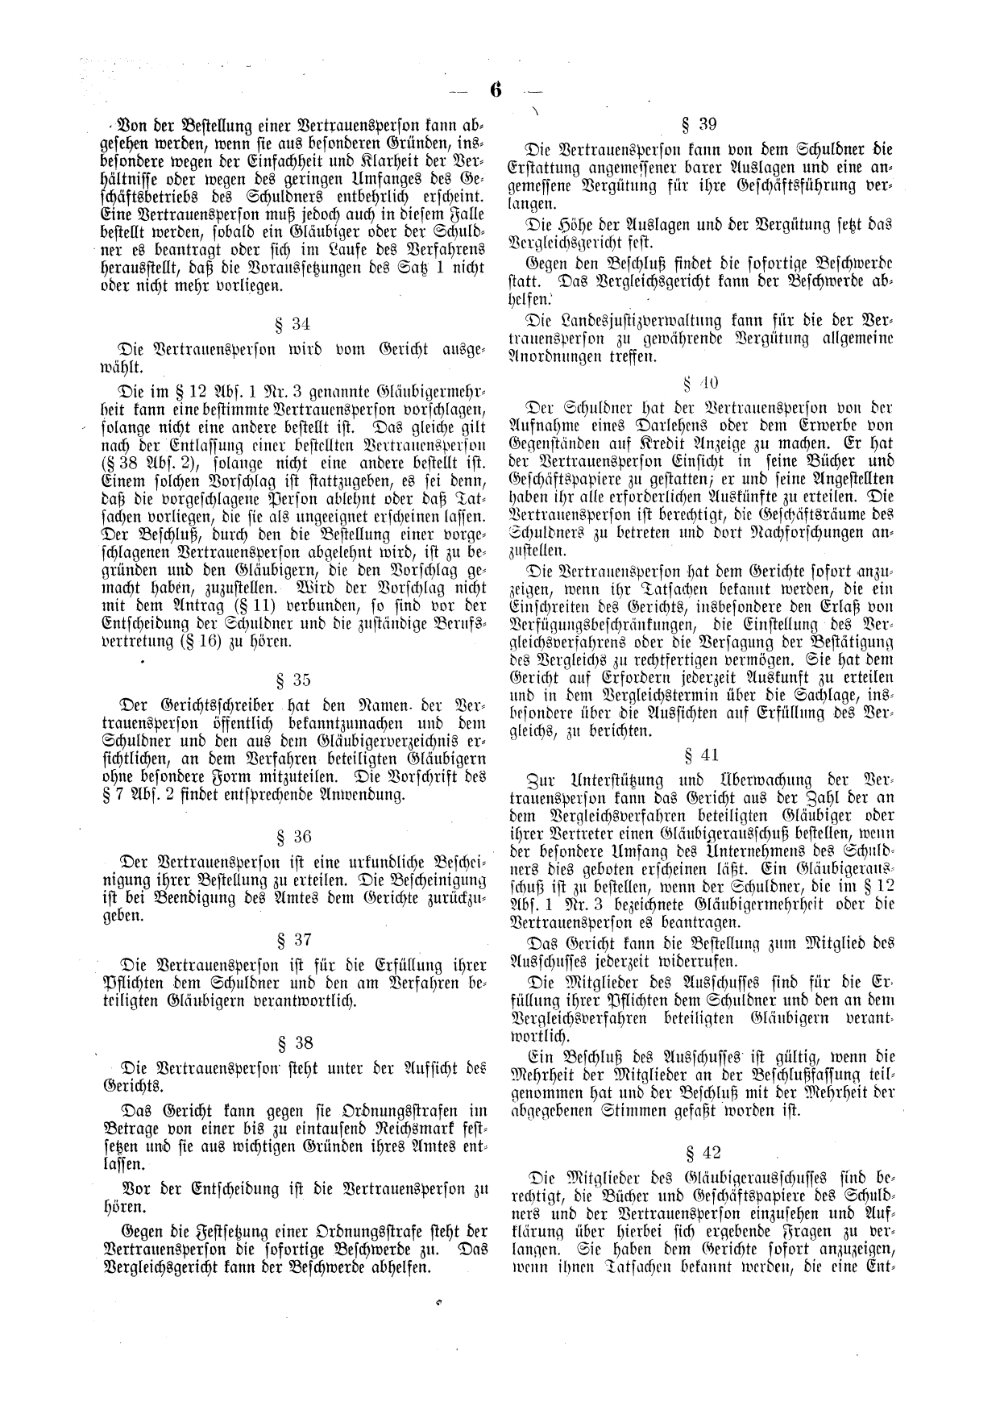 Scan of page 6